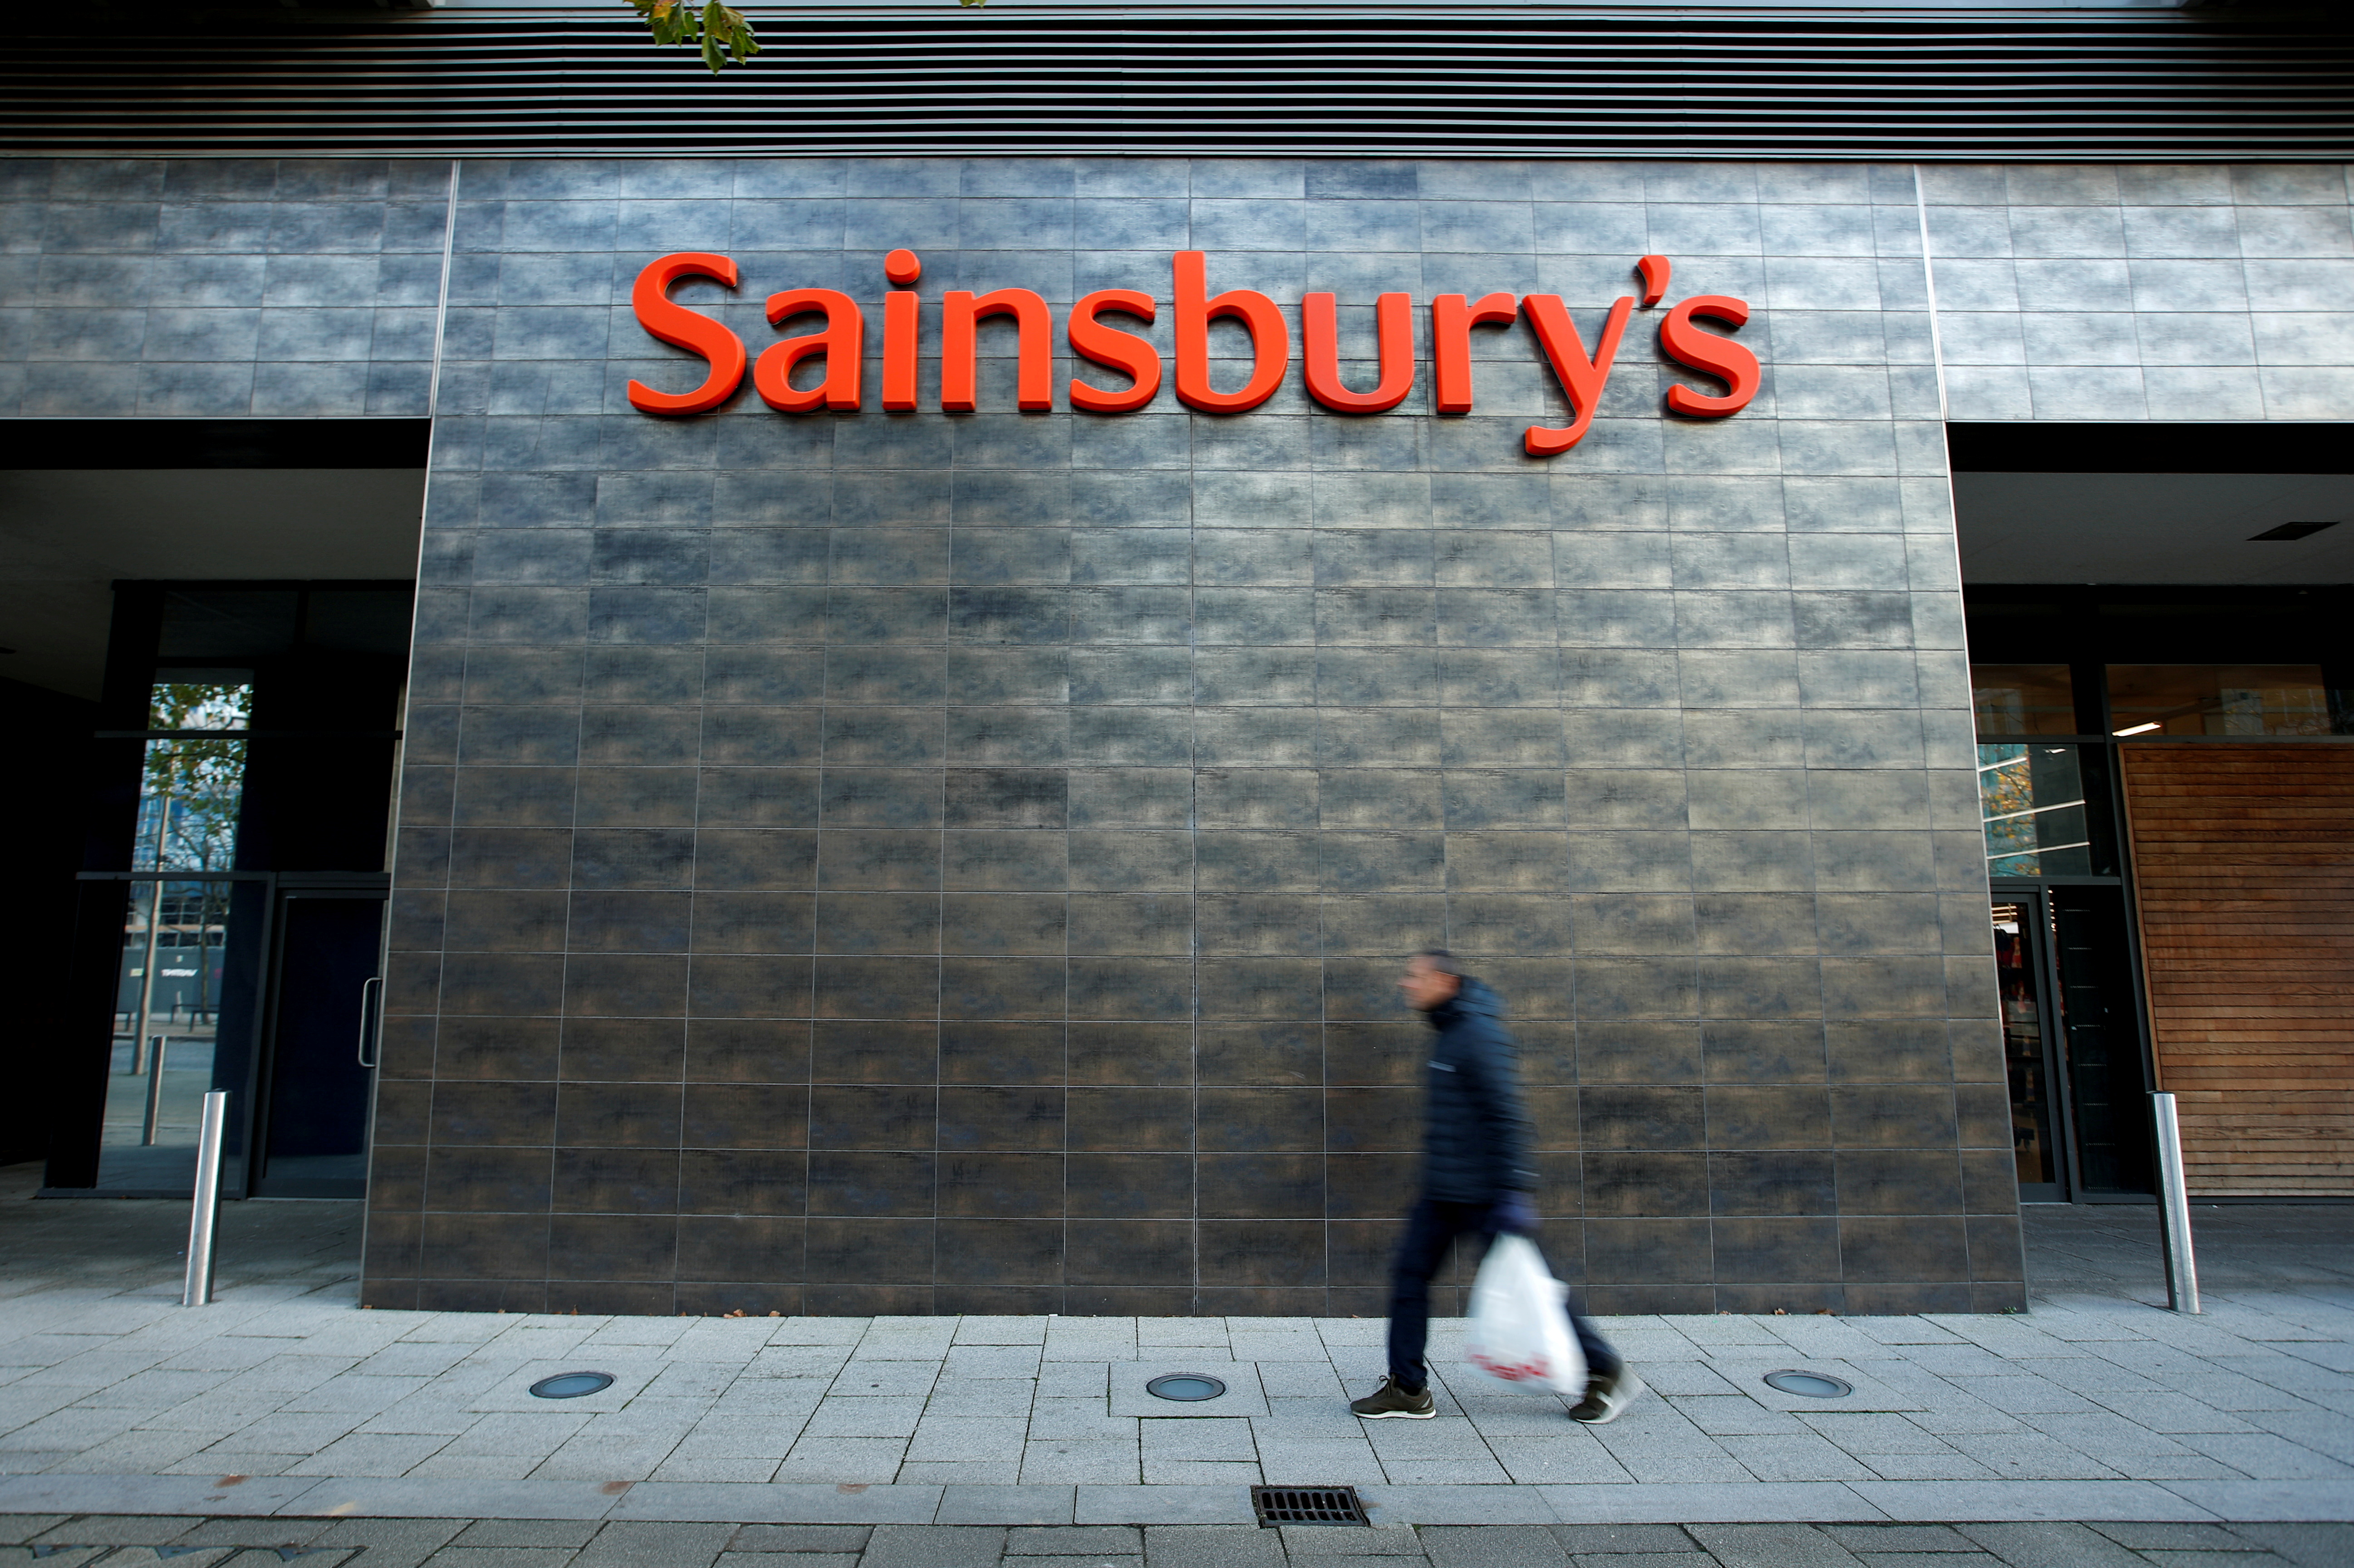 A person walks past a Sainsbury's store in Milton Keynes, Britain November 5, 2020. REUTERS/Andrew Boyers